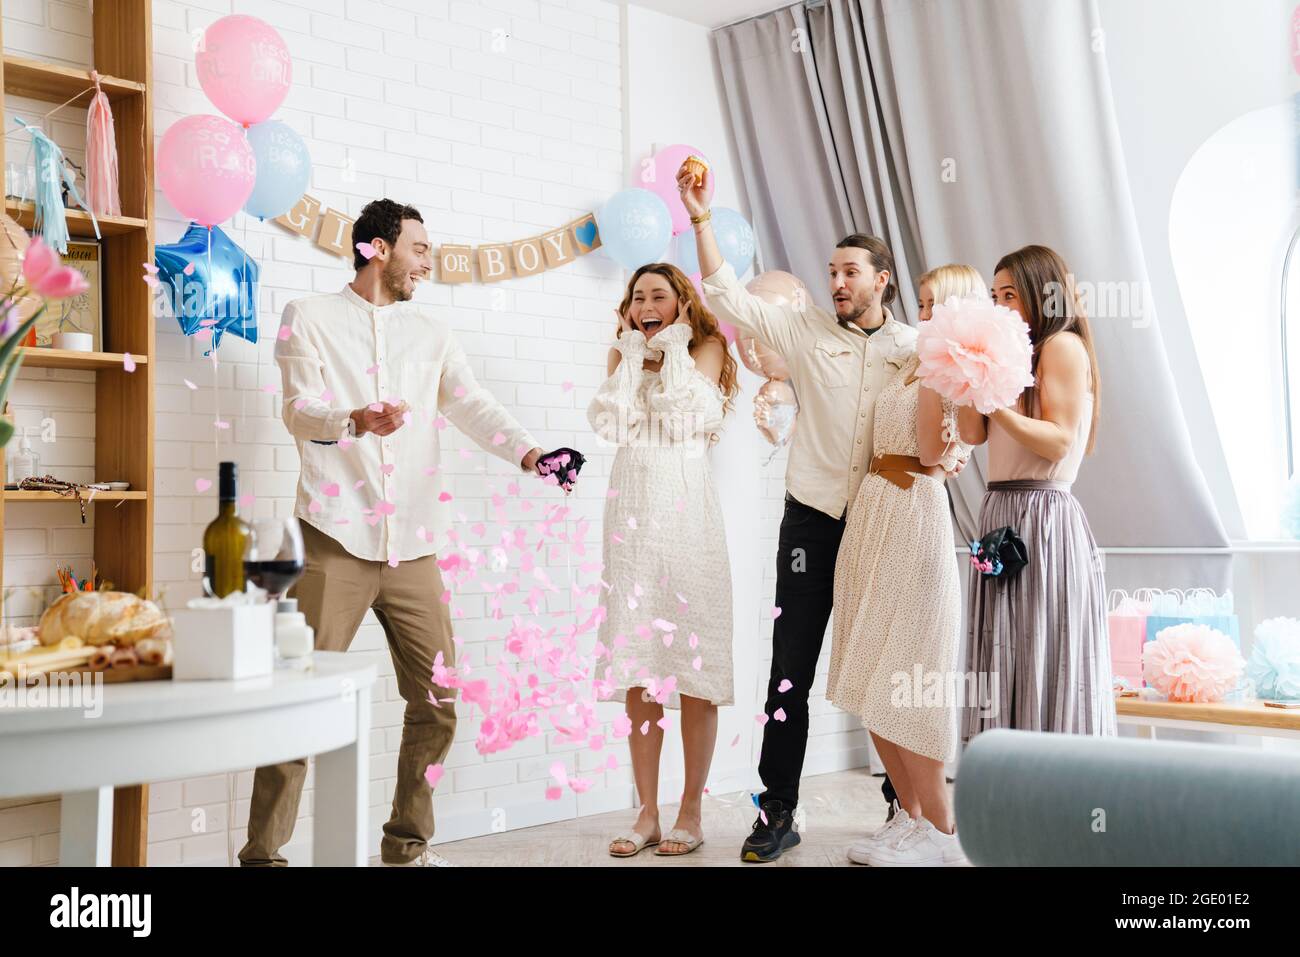 Young excited couple blowing up surprise balloon during gender reveal party indoors Stock Photo